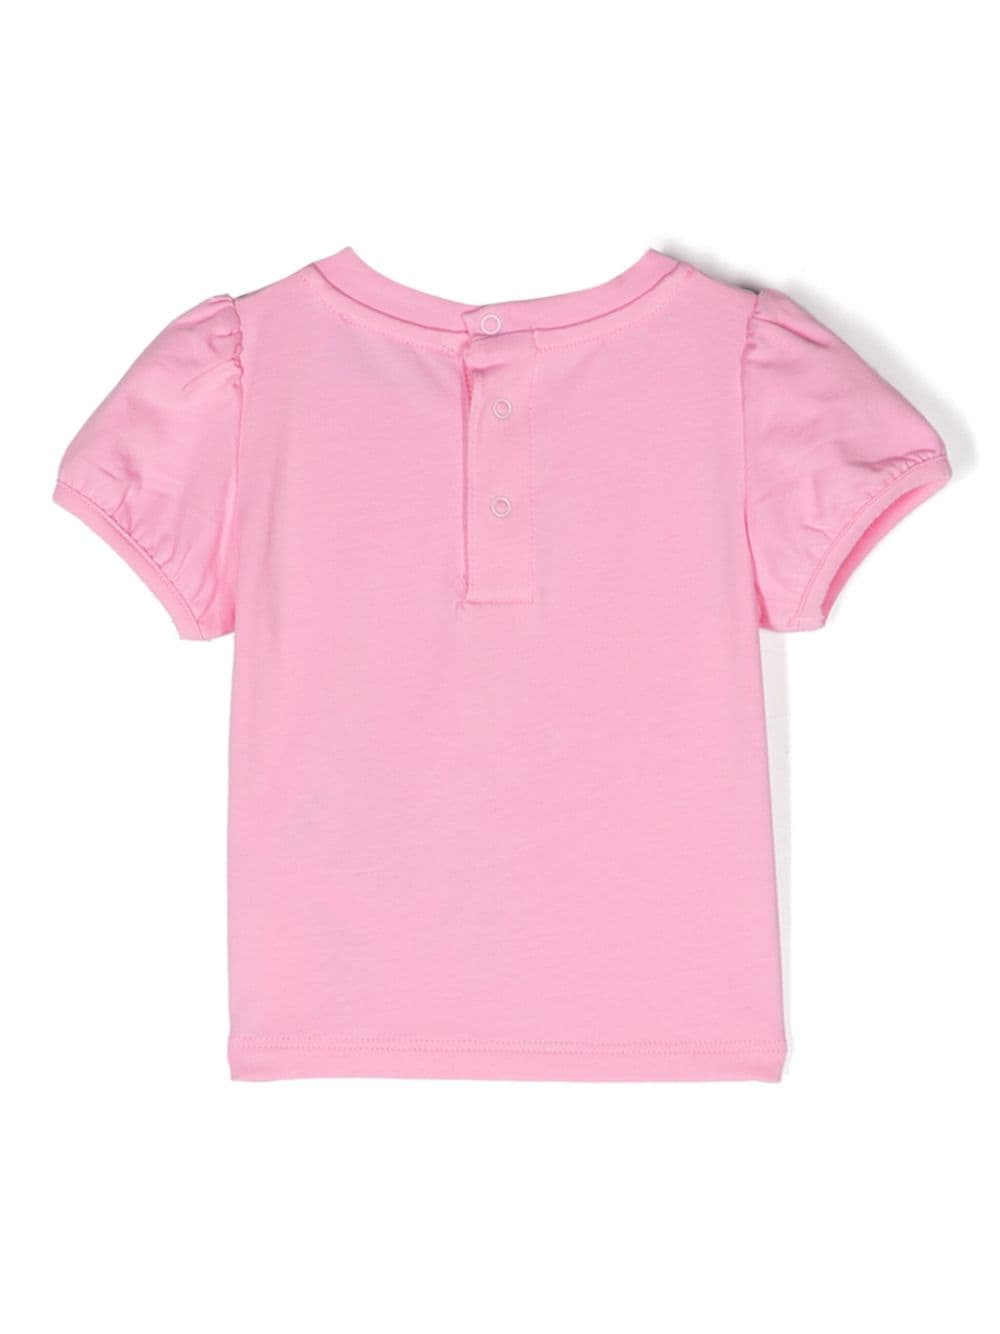 Pink baby girl t-shirt with bear